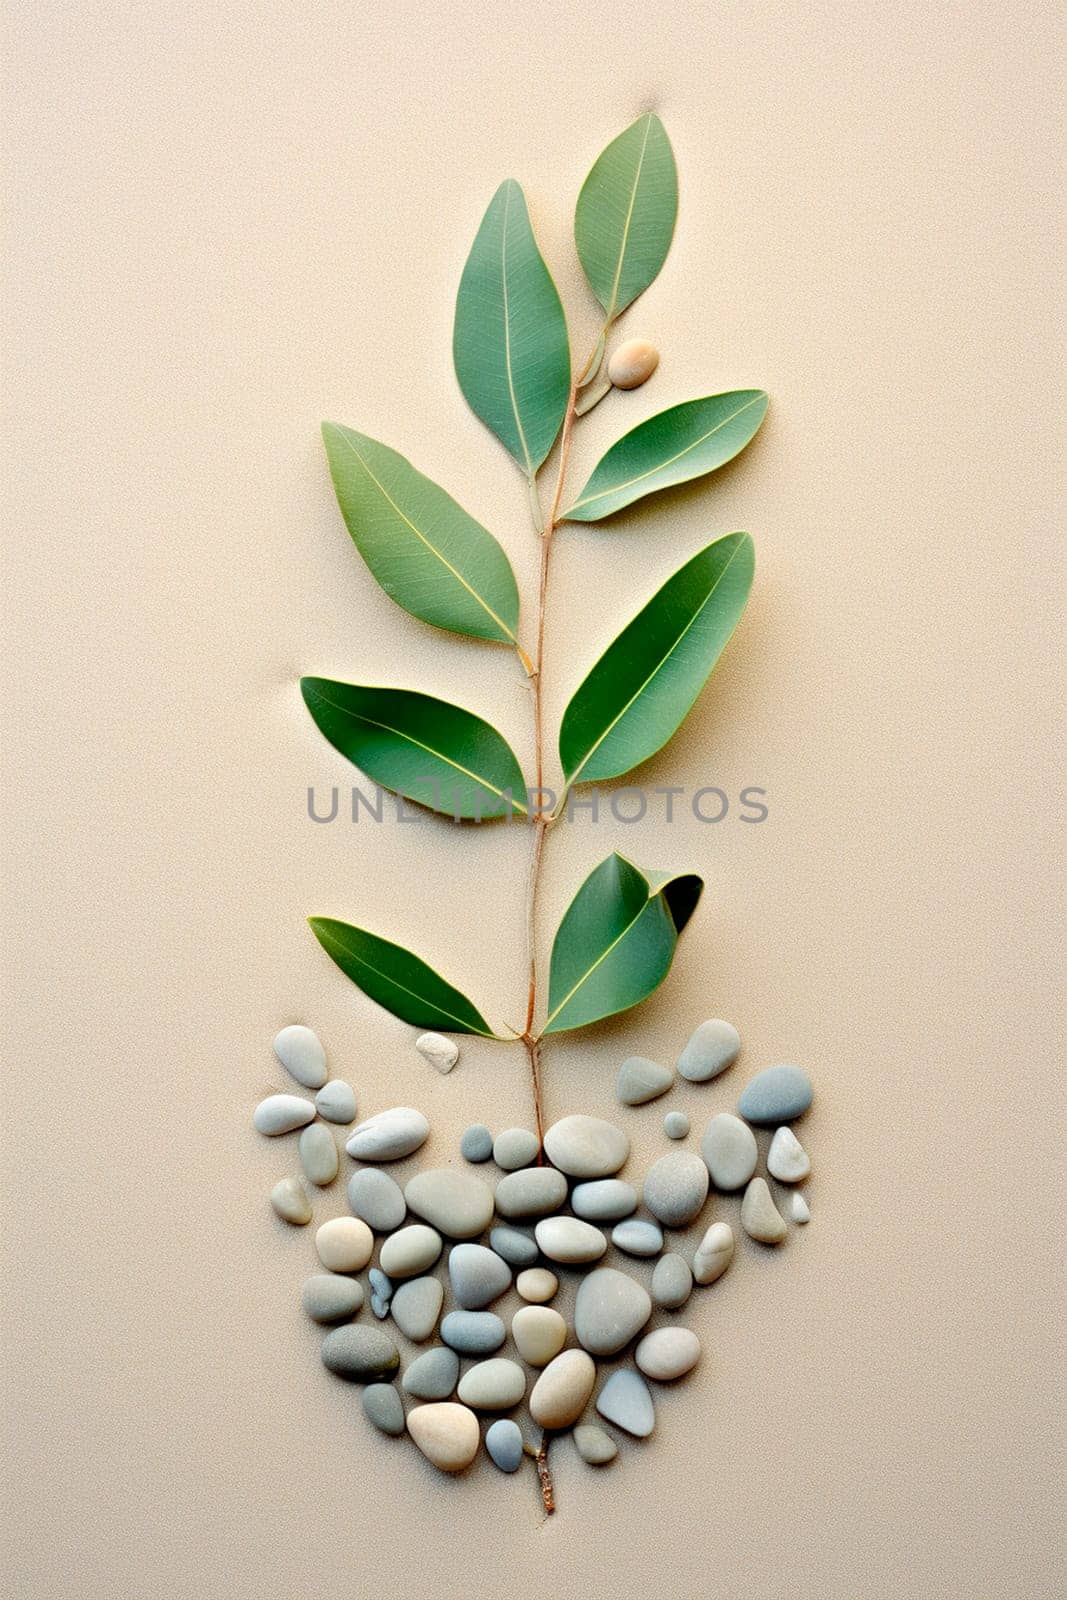 Smooth stones and spa plant. Selective focus. Nature.